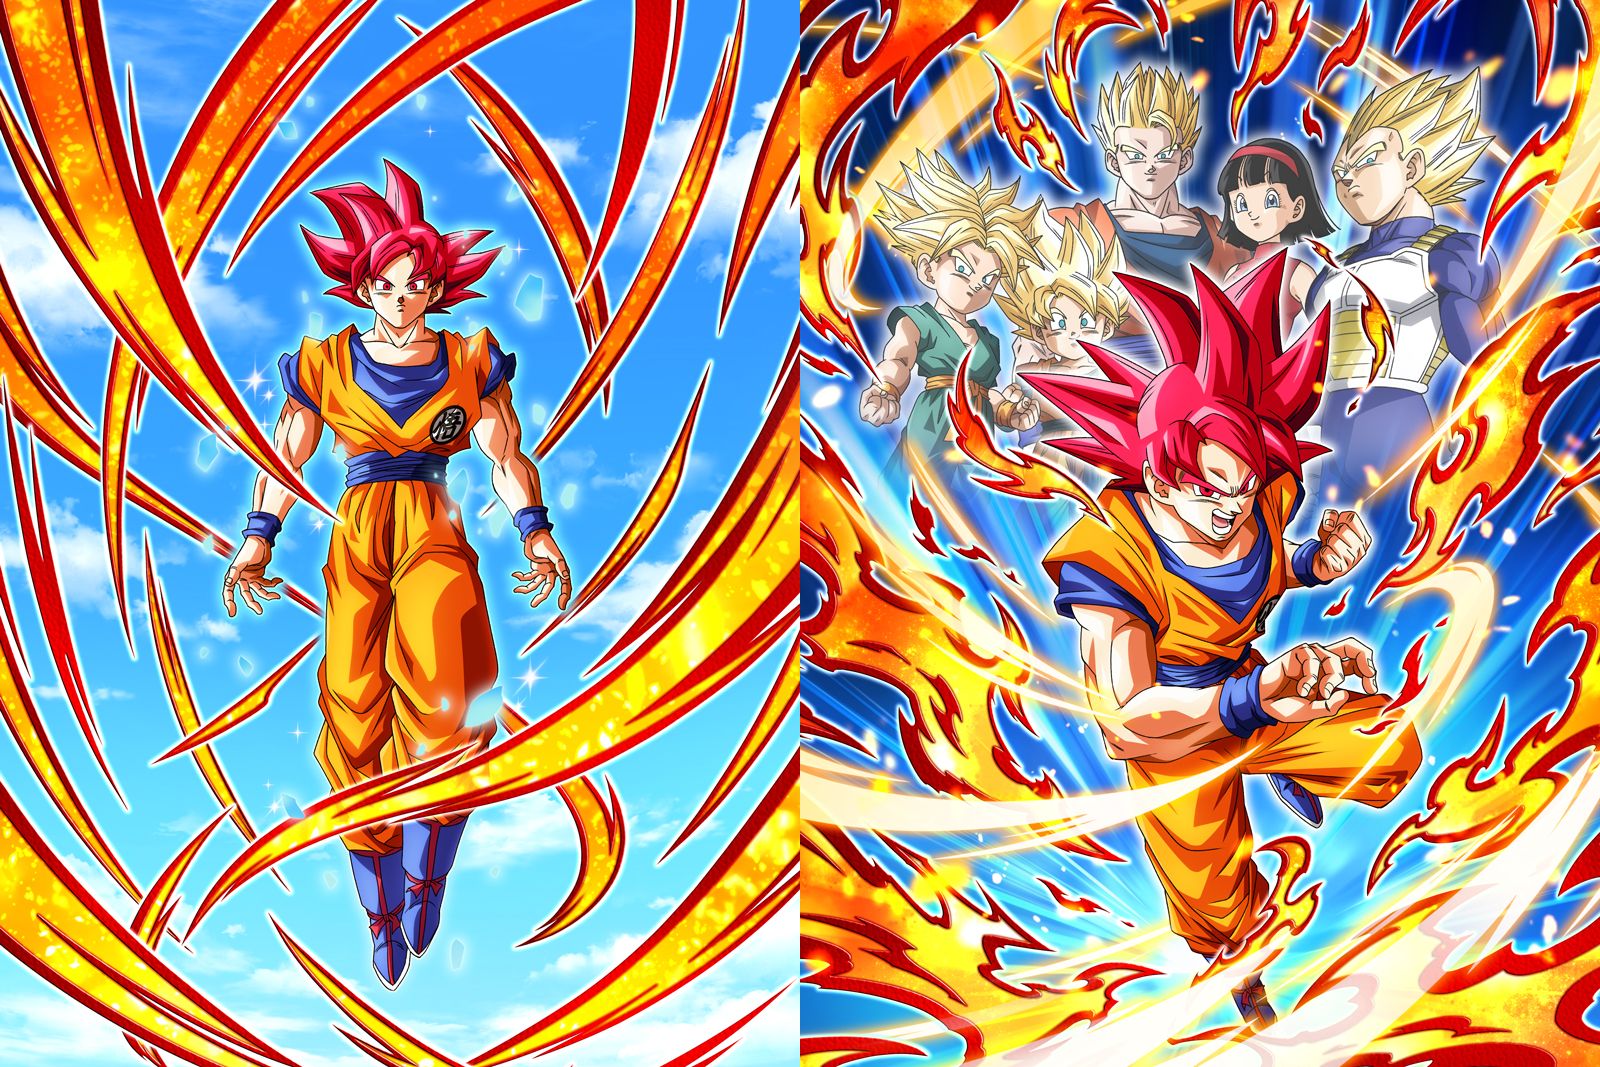 [Saiyan Day] Dokkan Battle Releasing New Super Saiyan God Goku! Check Out the Painstakingly Crafted Animations!!